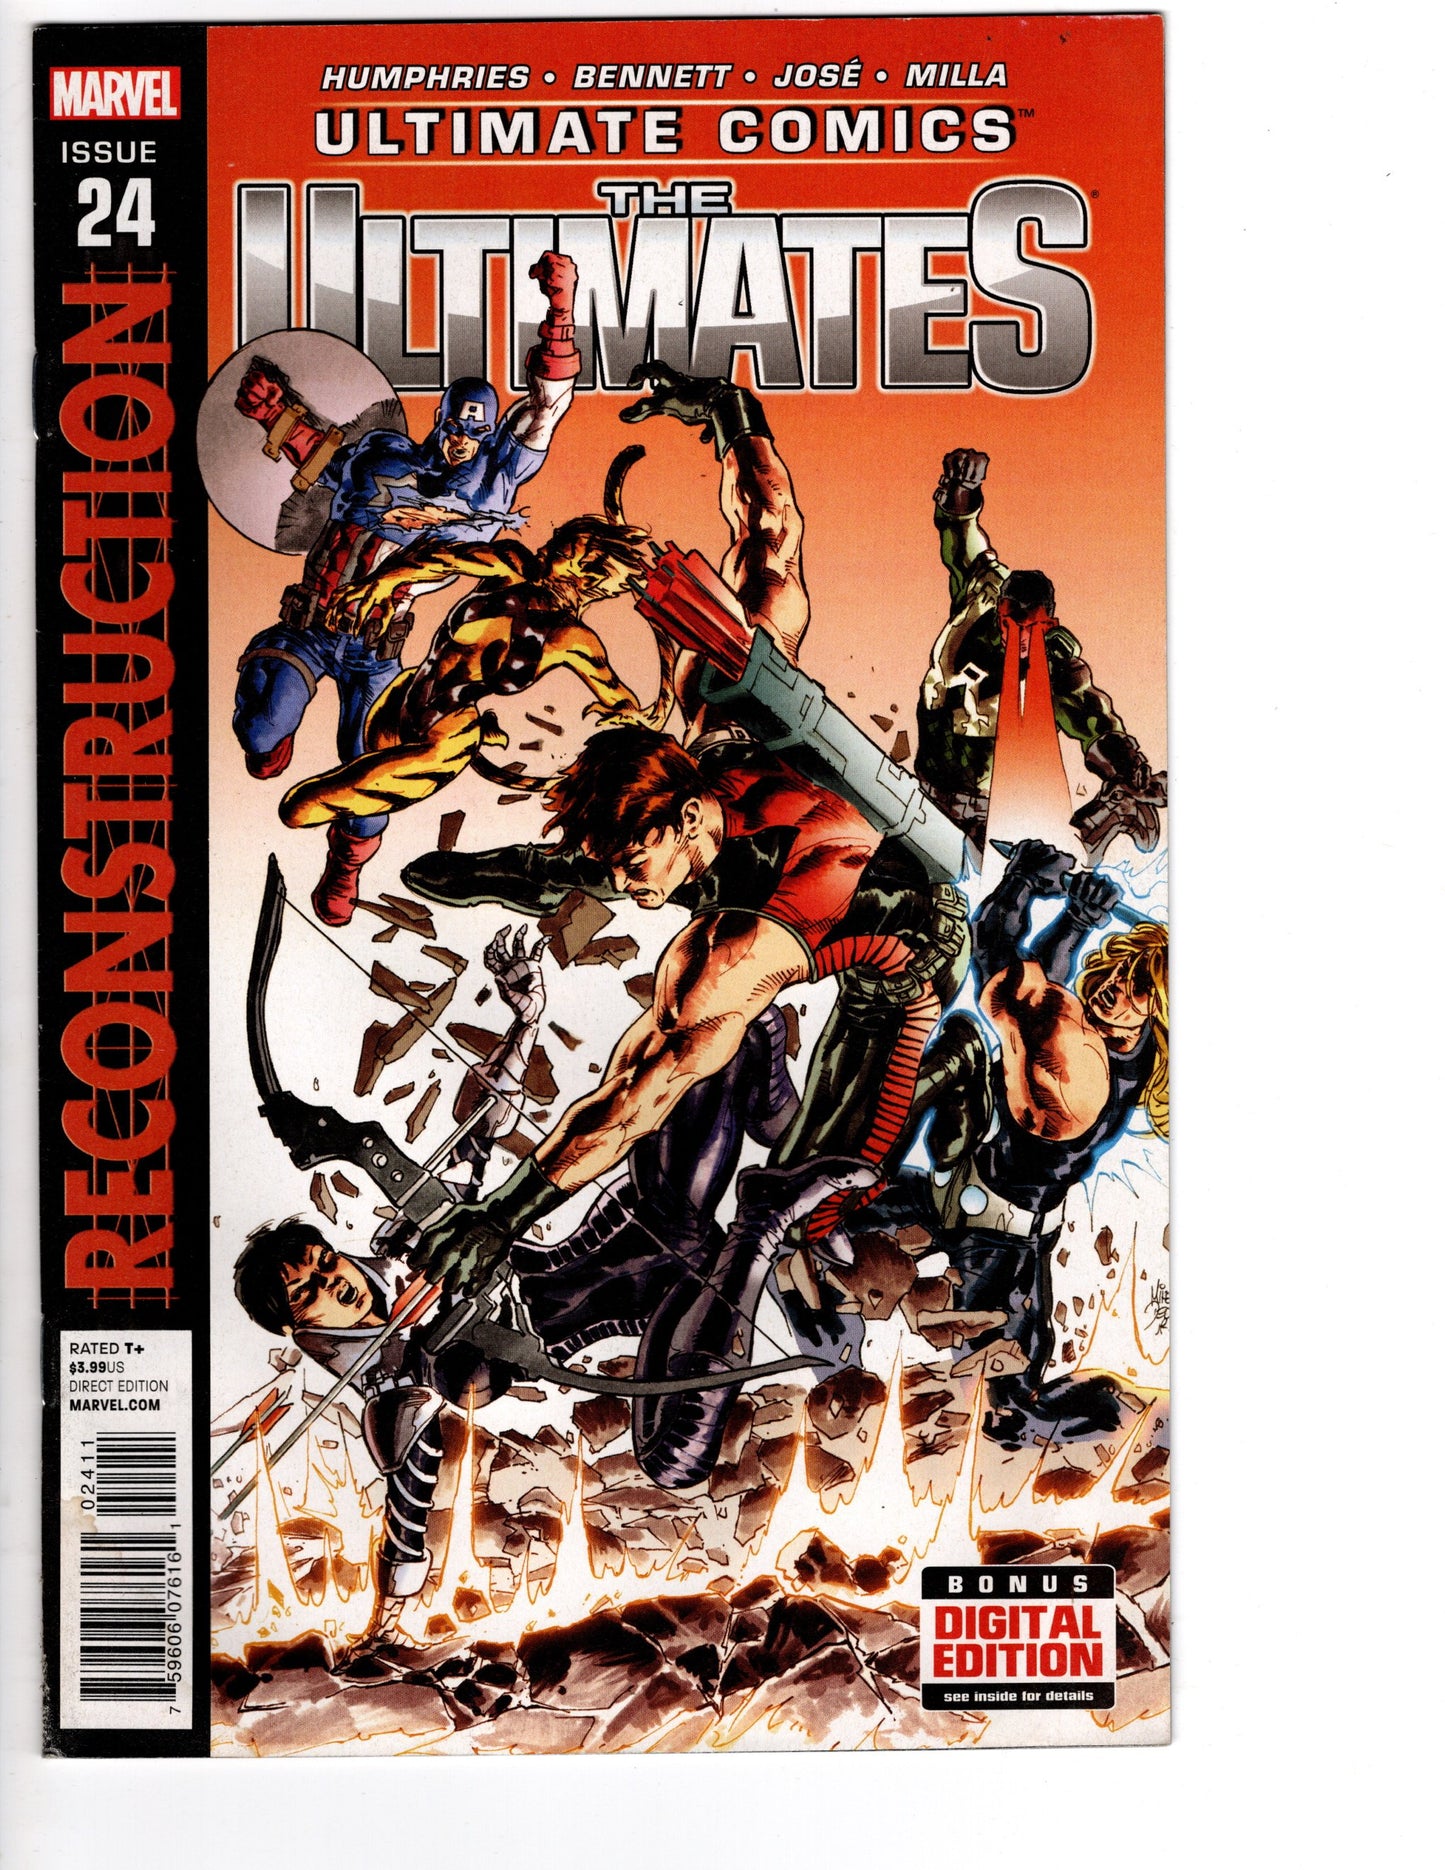 The Ultimates #24